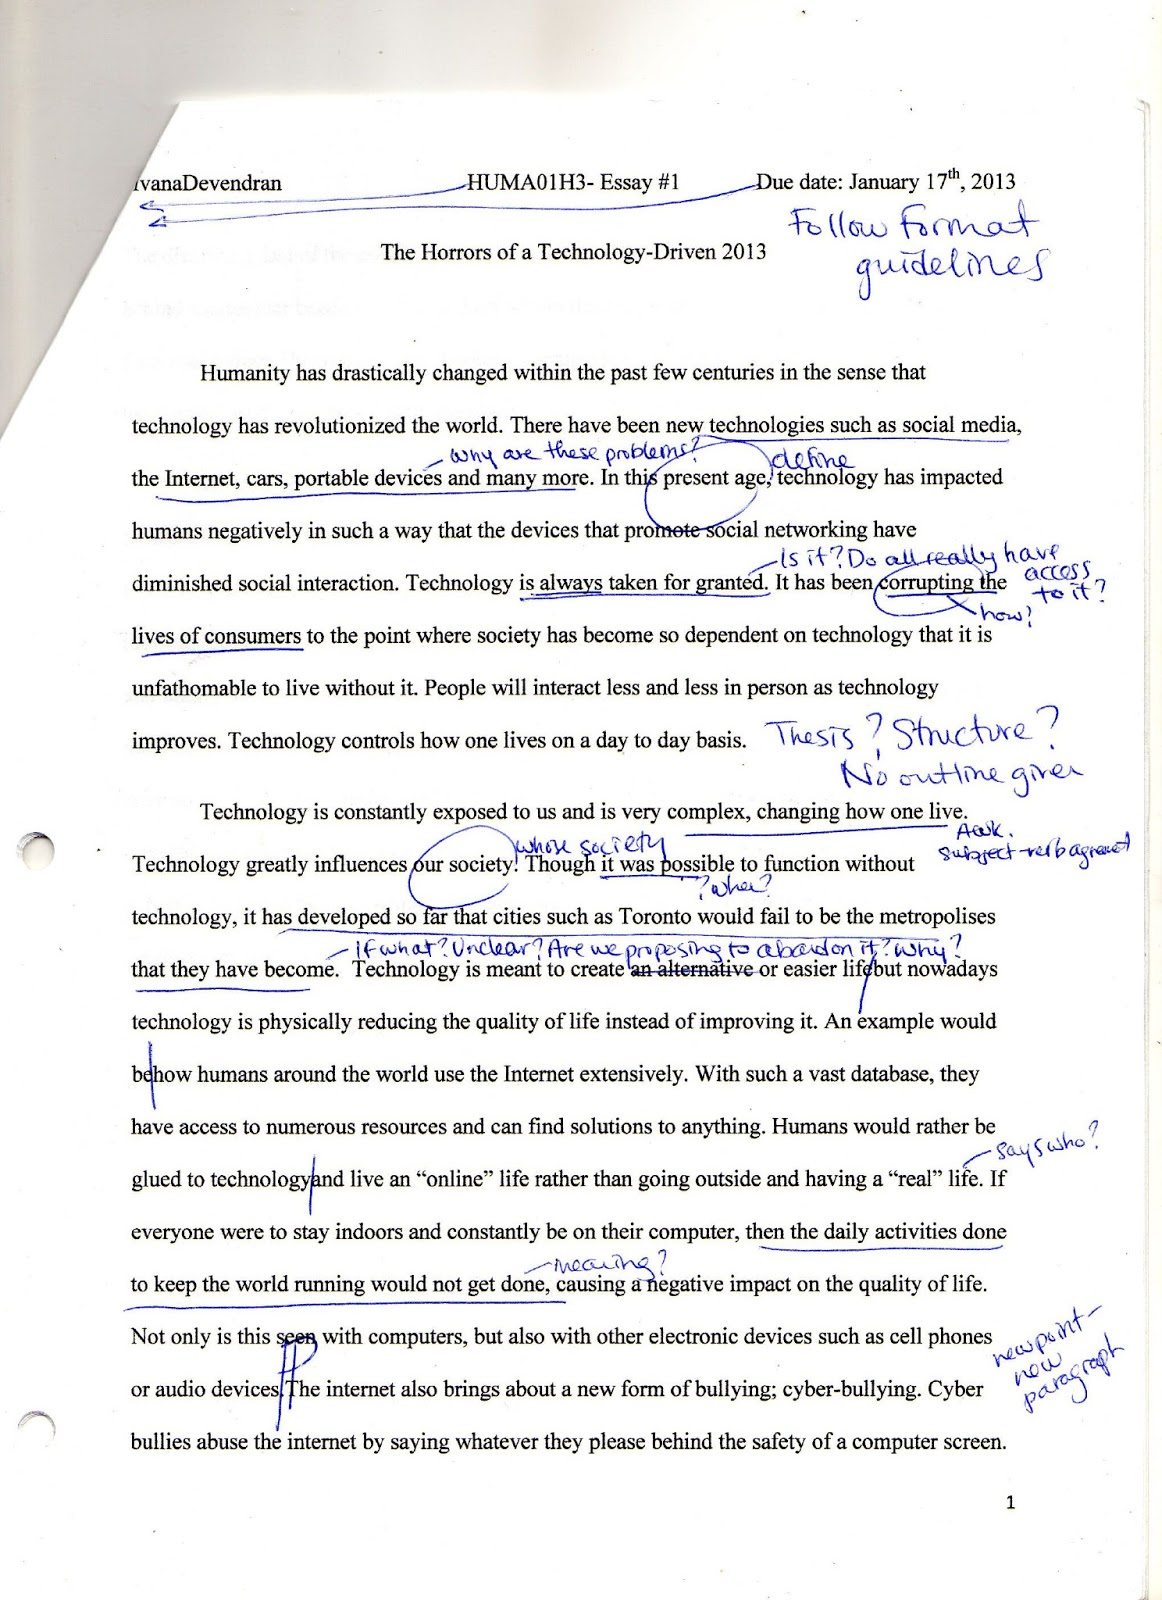 write a thesis statement for your essay